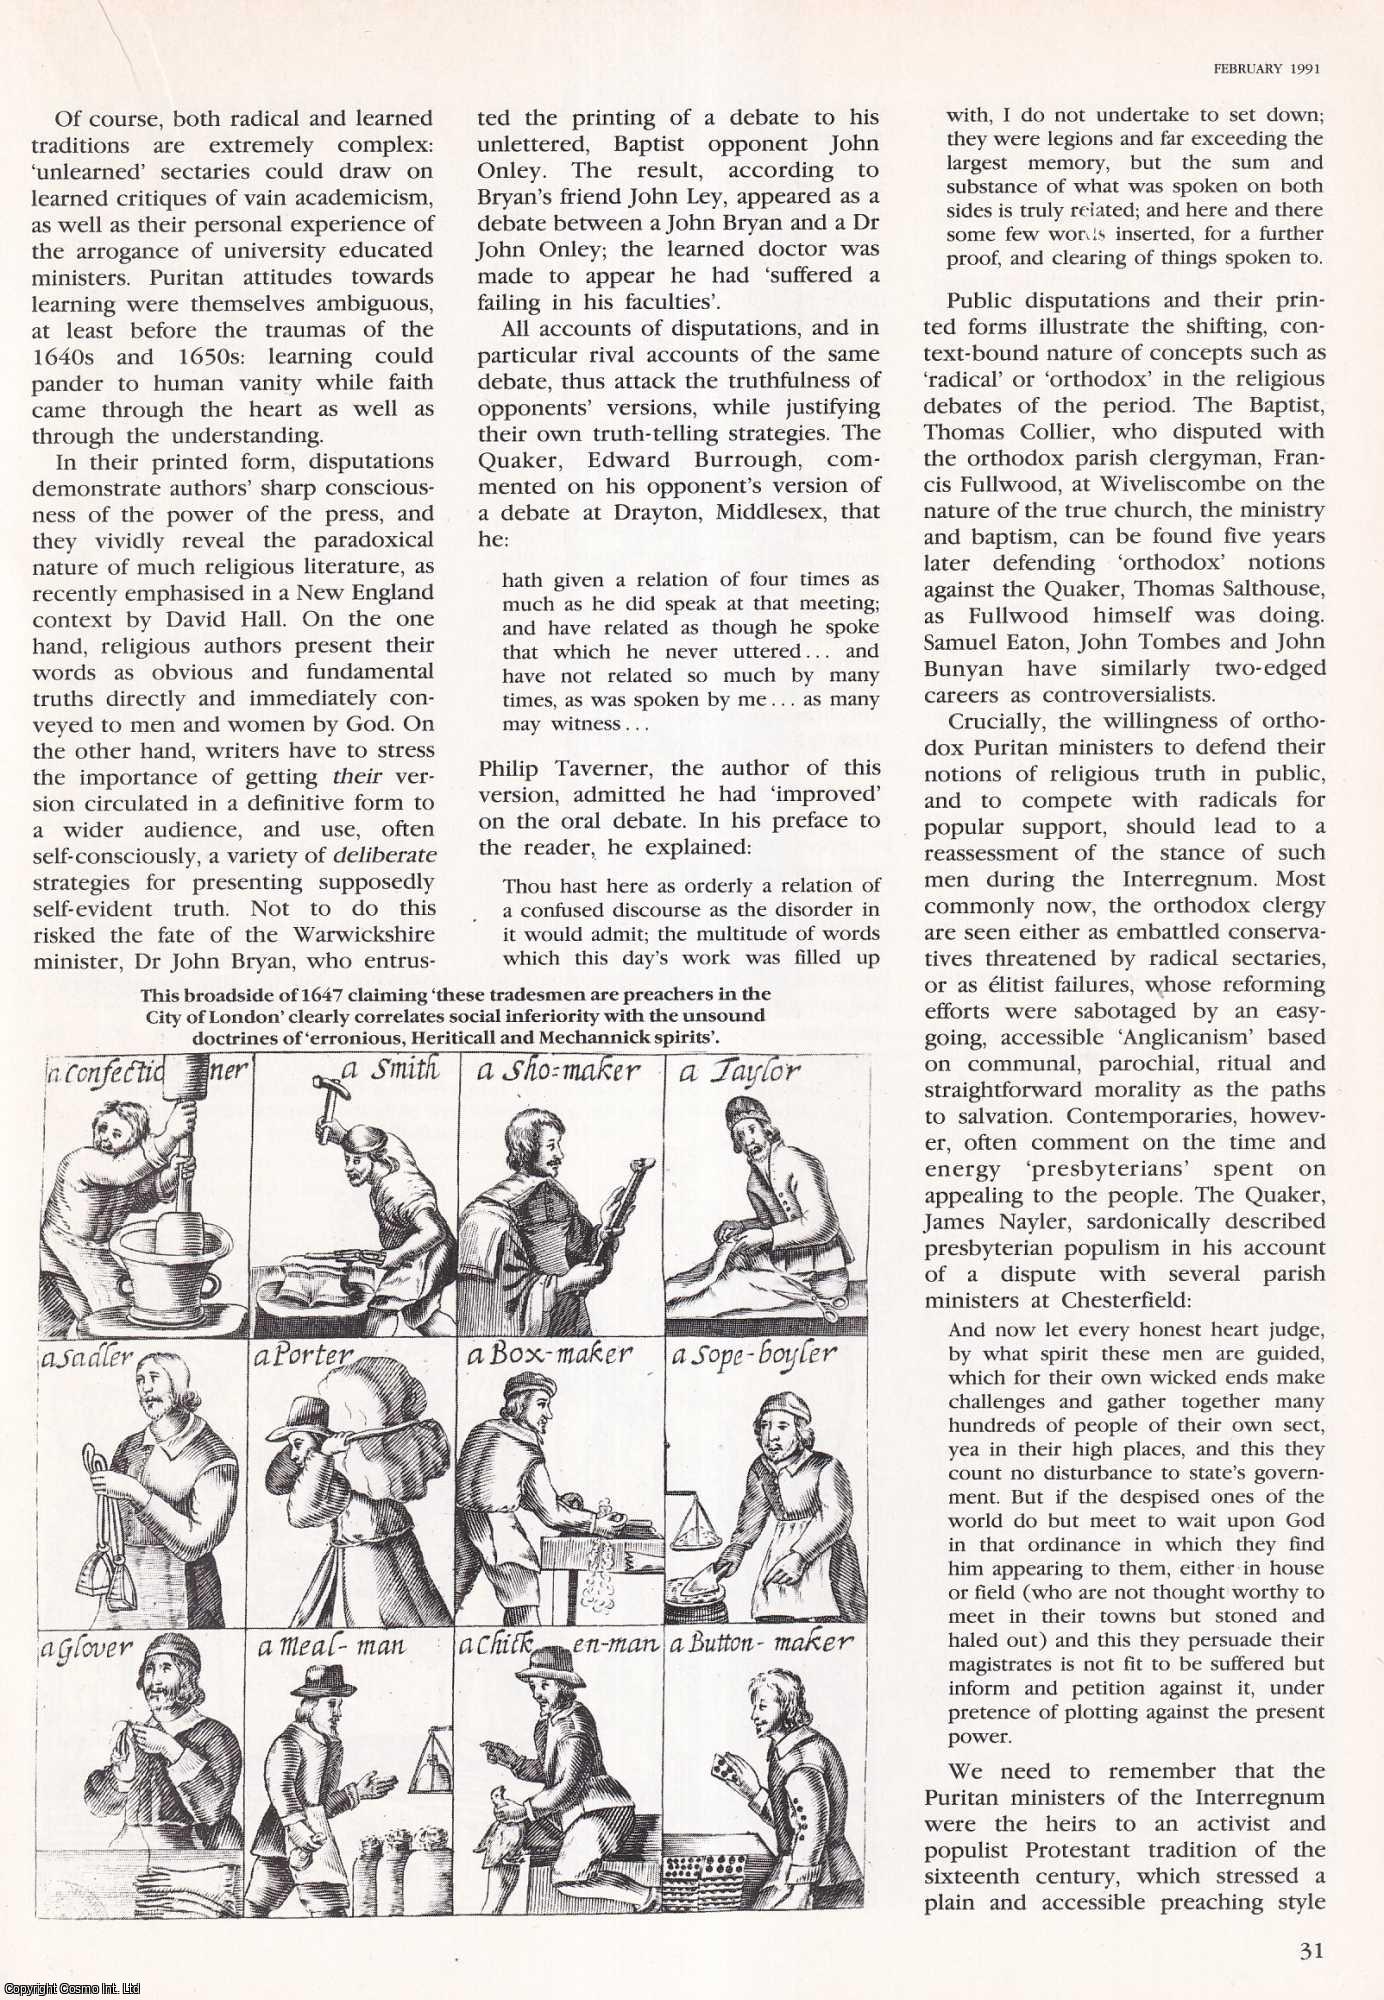 Ann Hughes - Public Disputations, Pamphlets and Polemic, 1649-60. An original article from History Today, 1991.